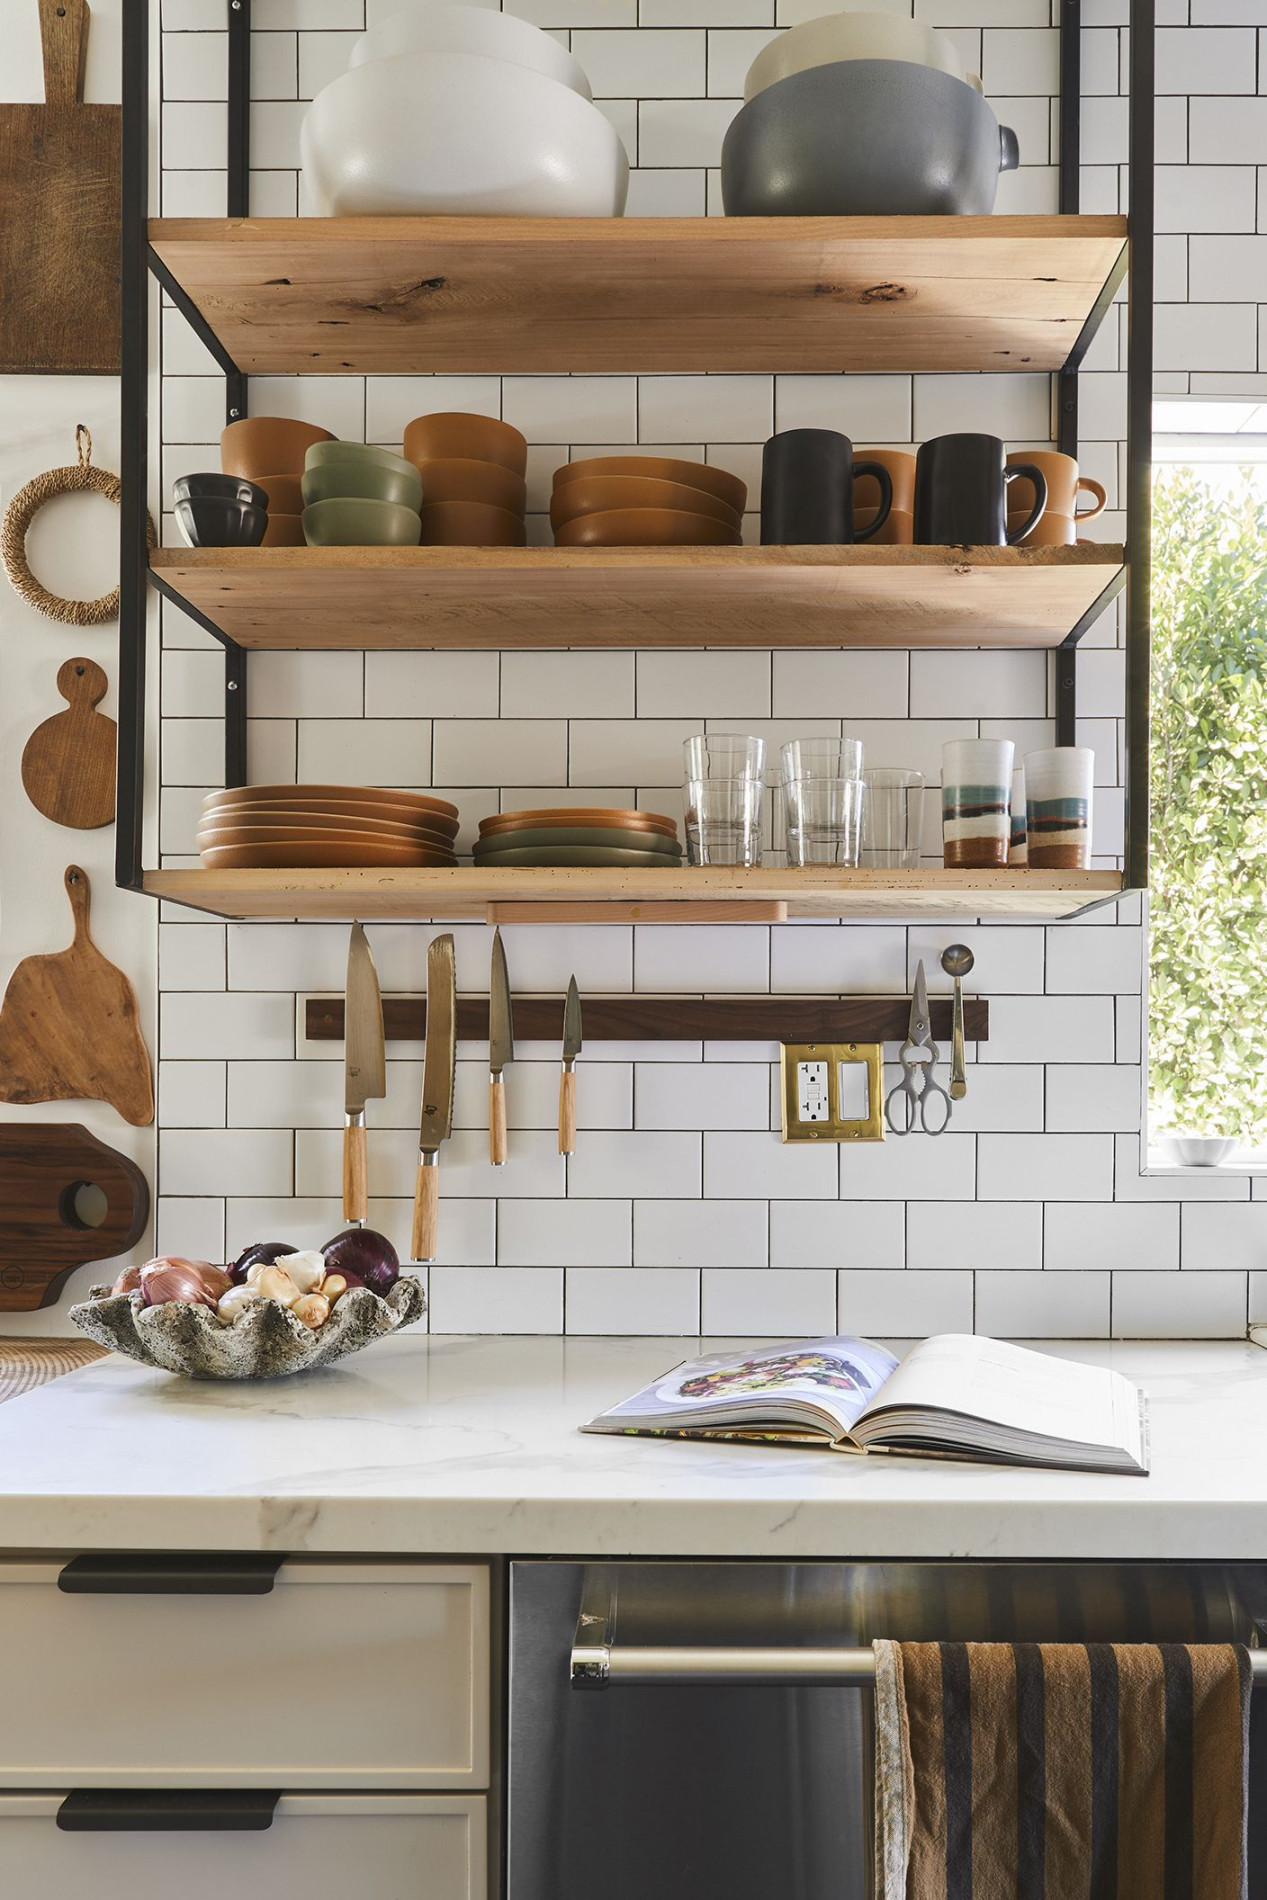 Best Kitchen Organization Ideas for Small Spaces